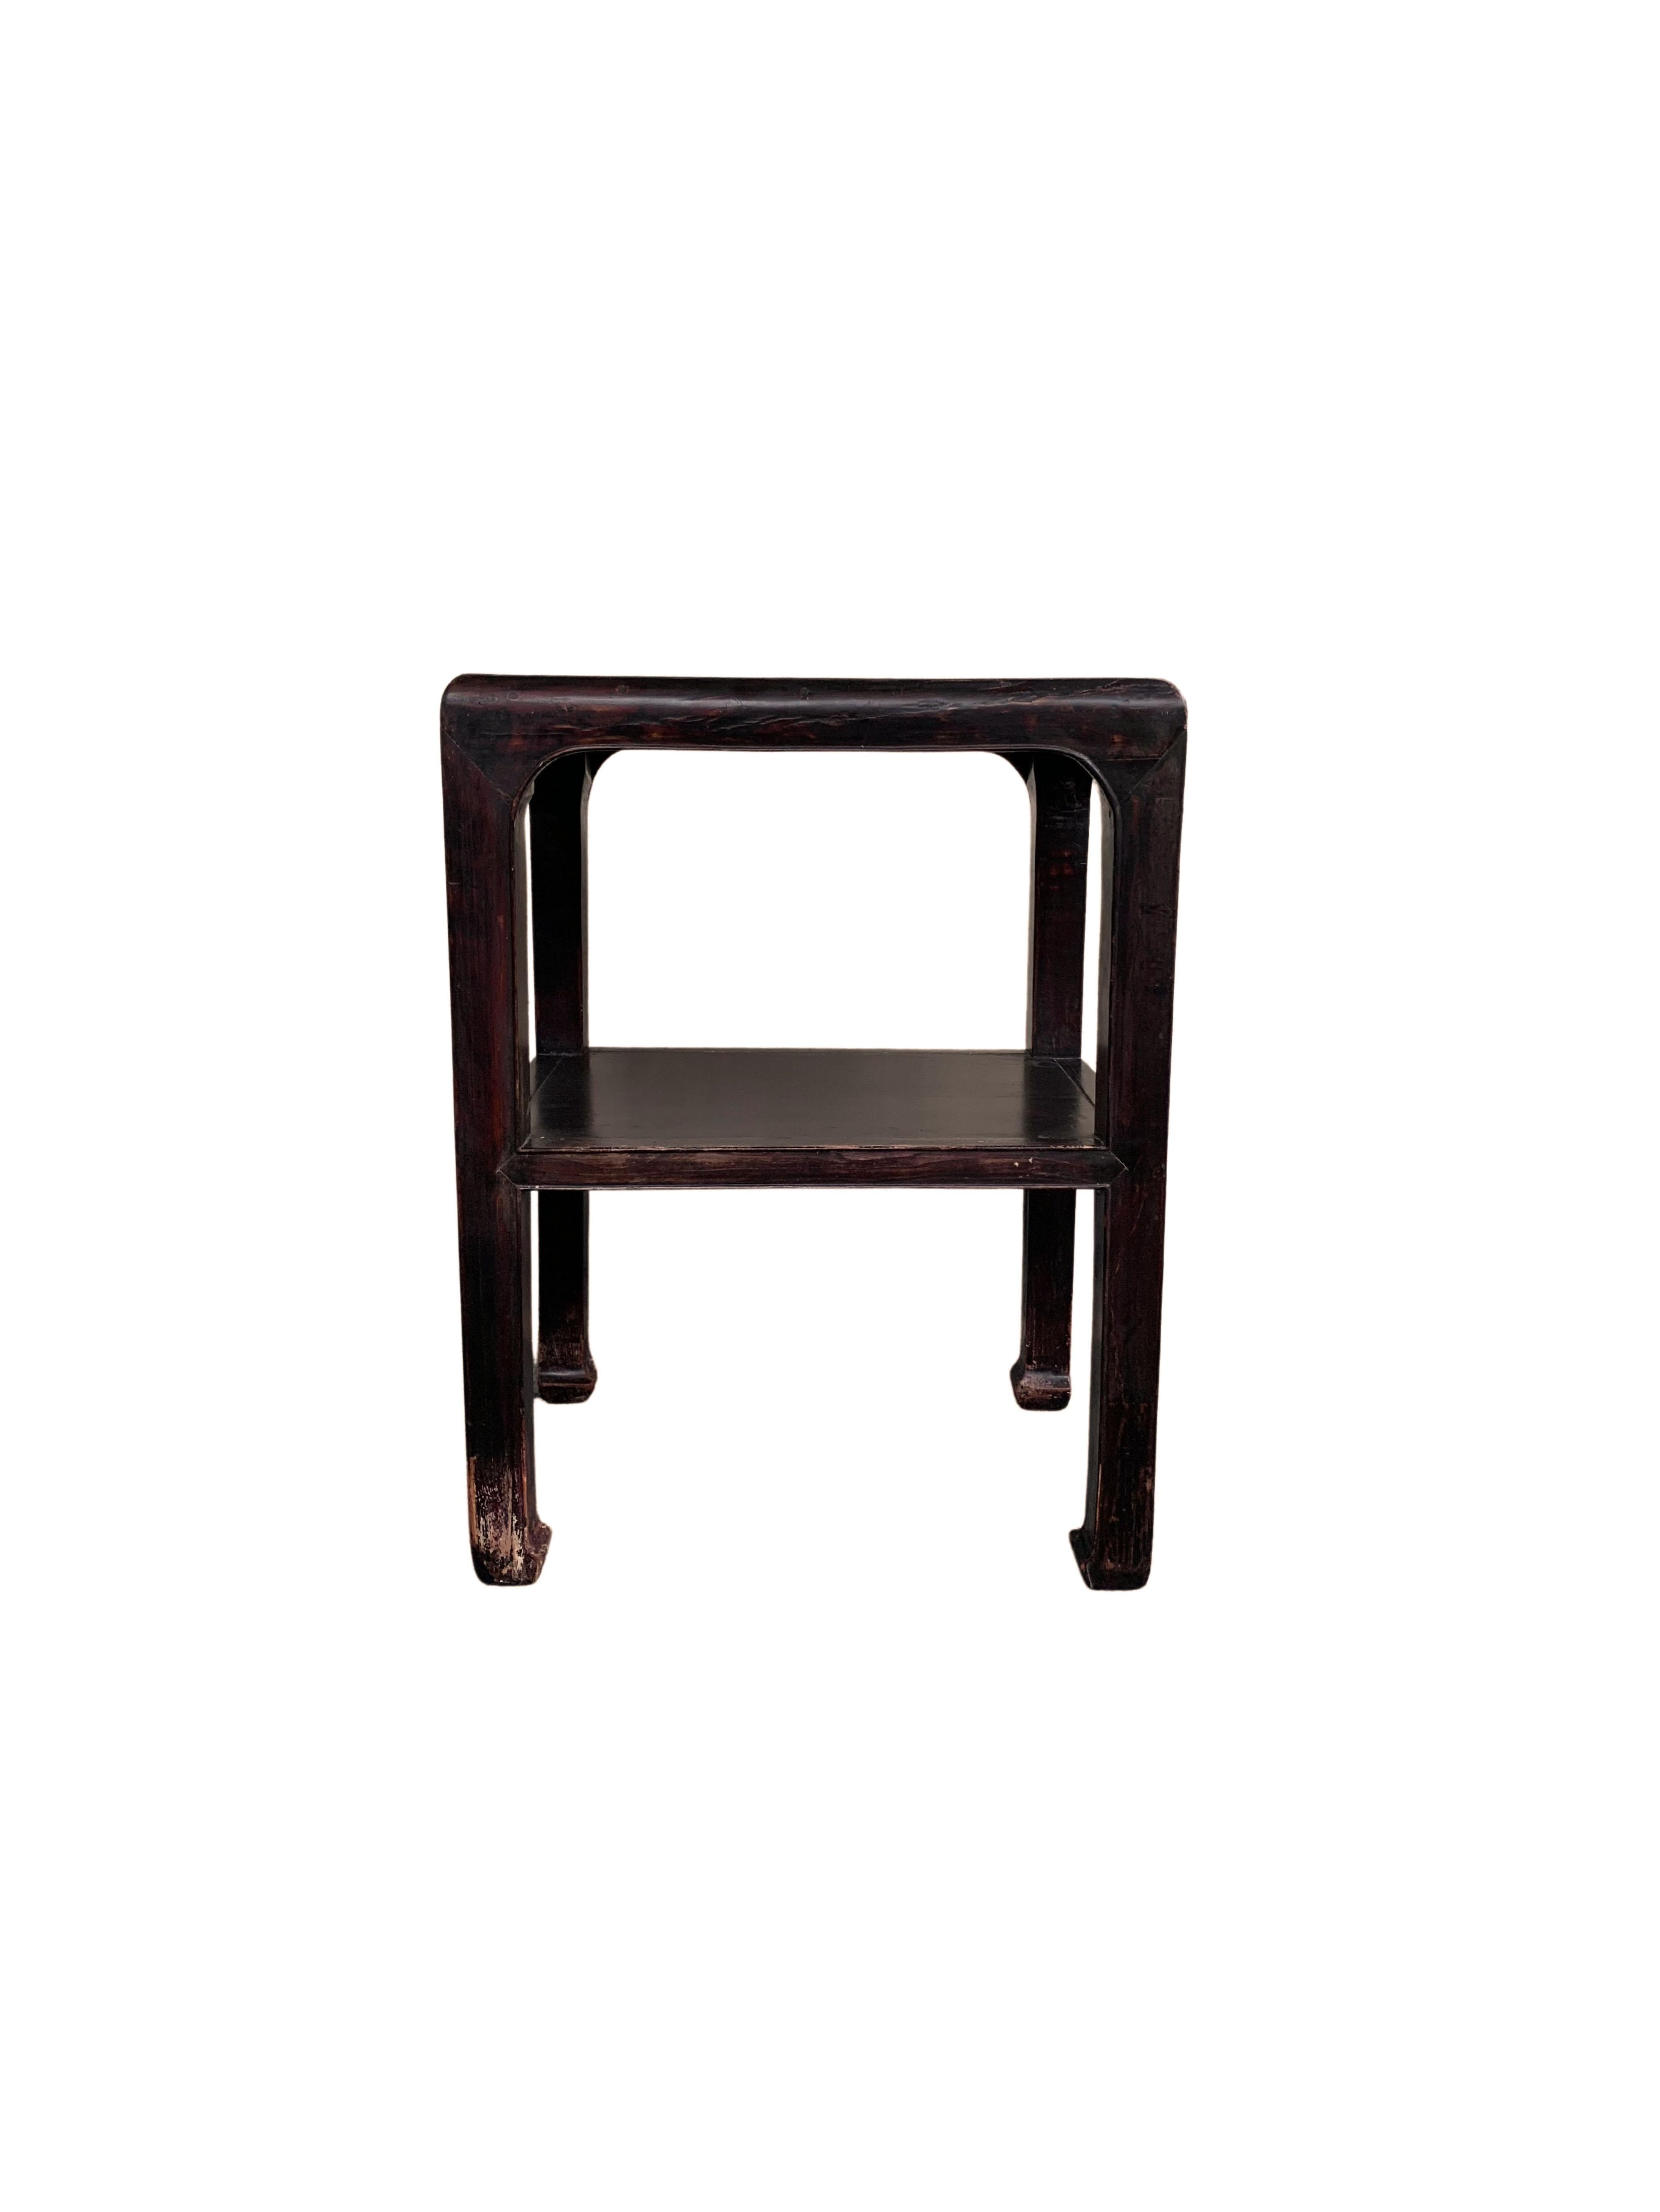 This elegant lacquered table was crafted in Northern China at the middle of the 20th century. It features elegant legs that are beautifully proportioned with curved ends. It features a lower shelf and square top. The wood has aged beautifully over